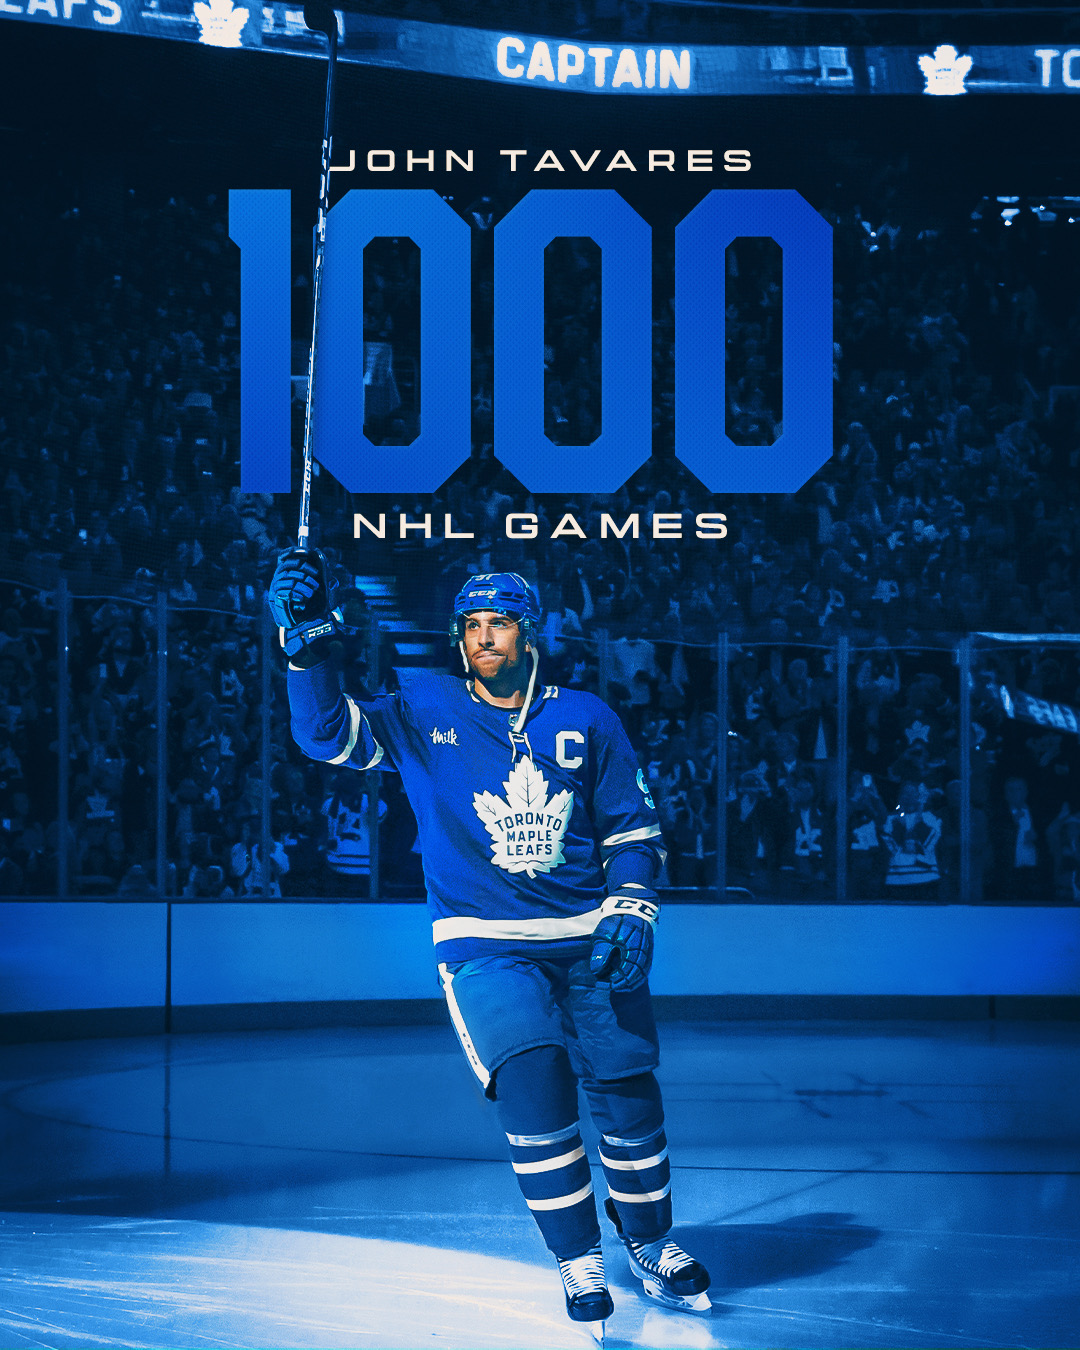 Toronto Maple Leafs games & counting